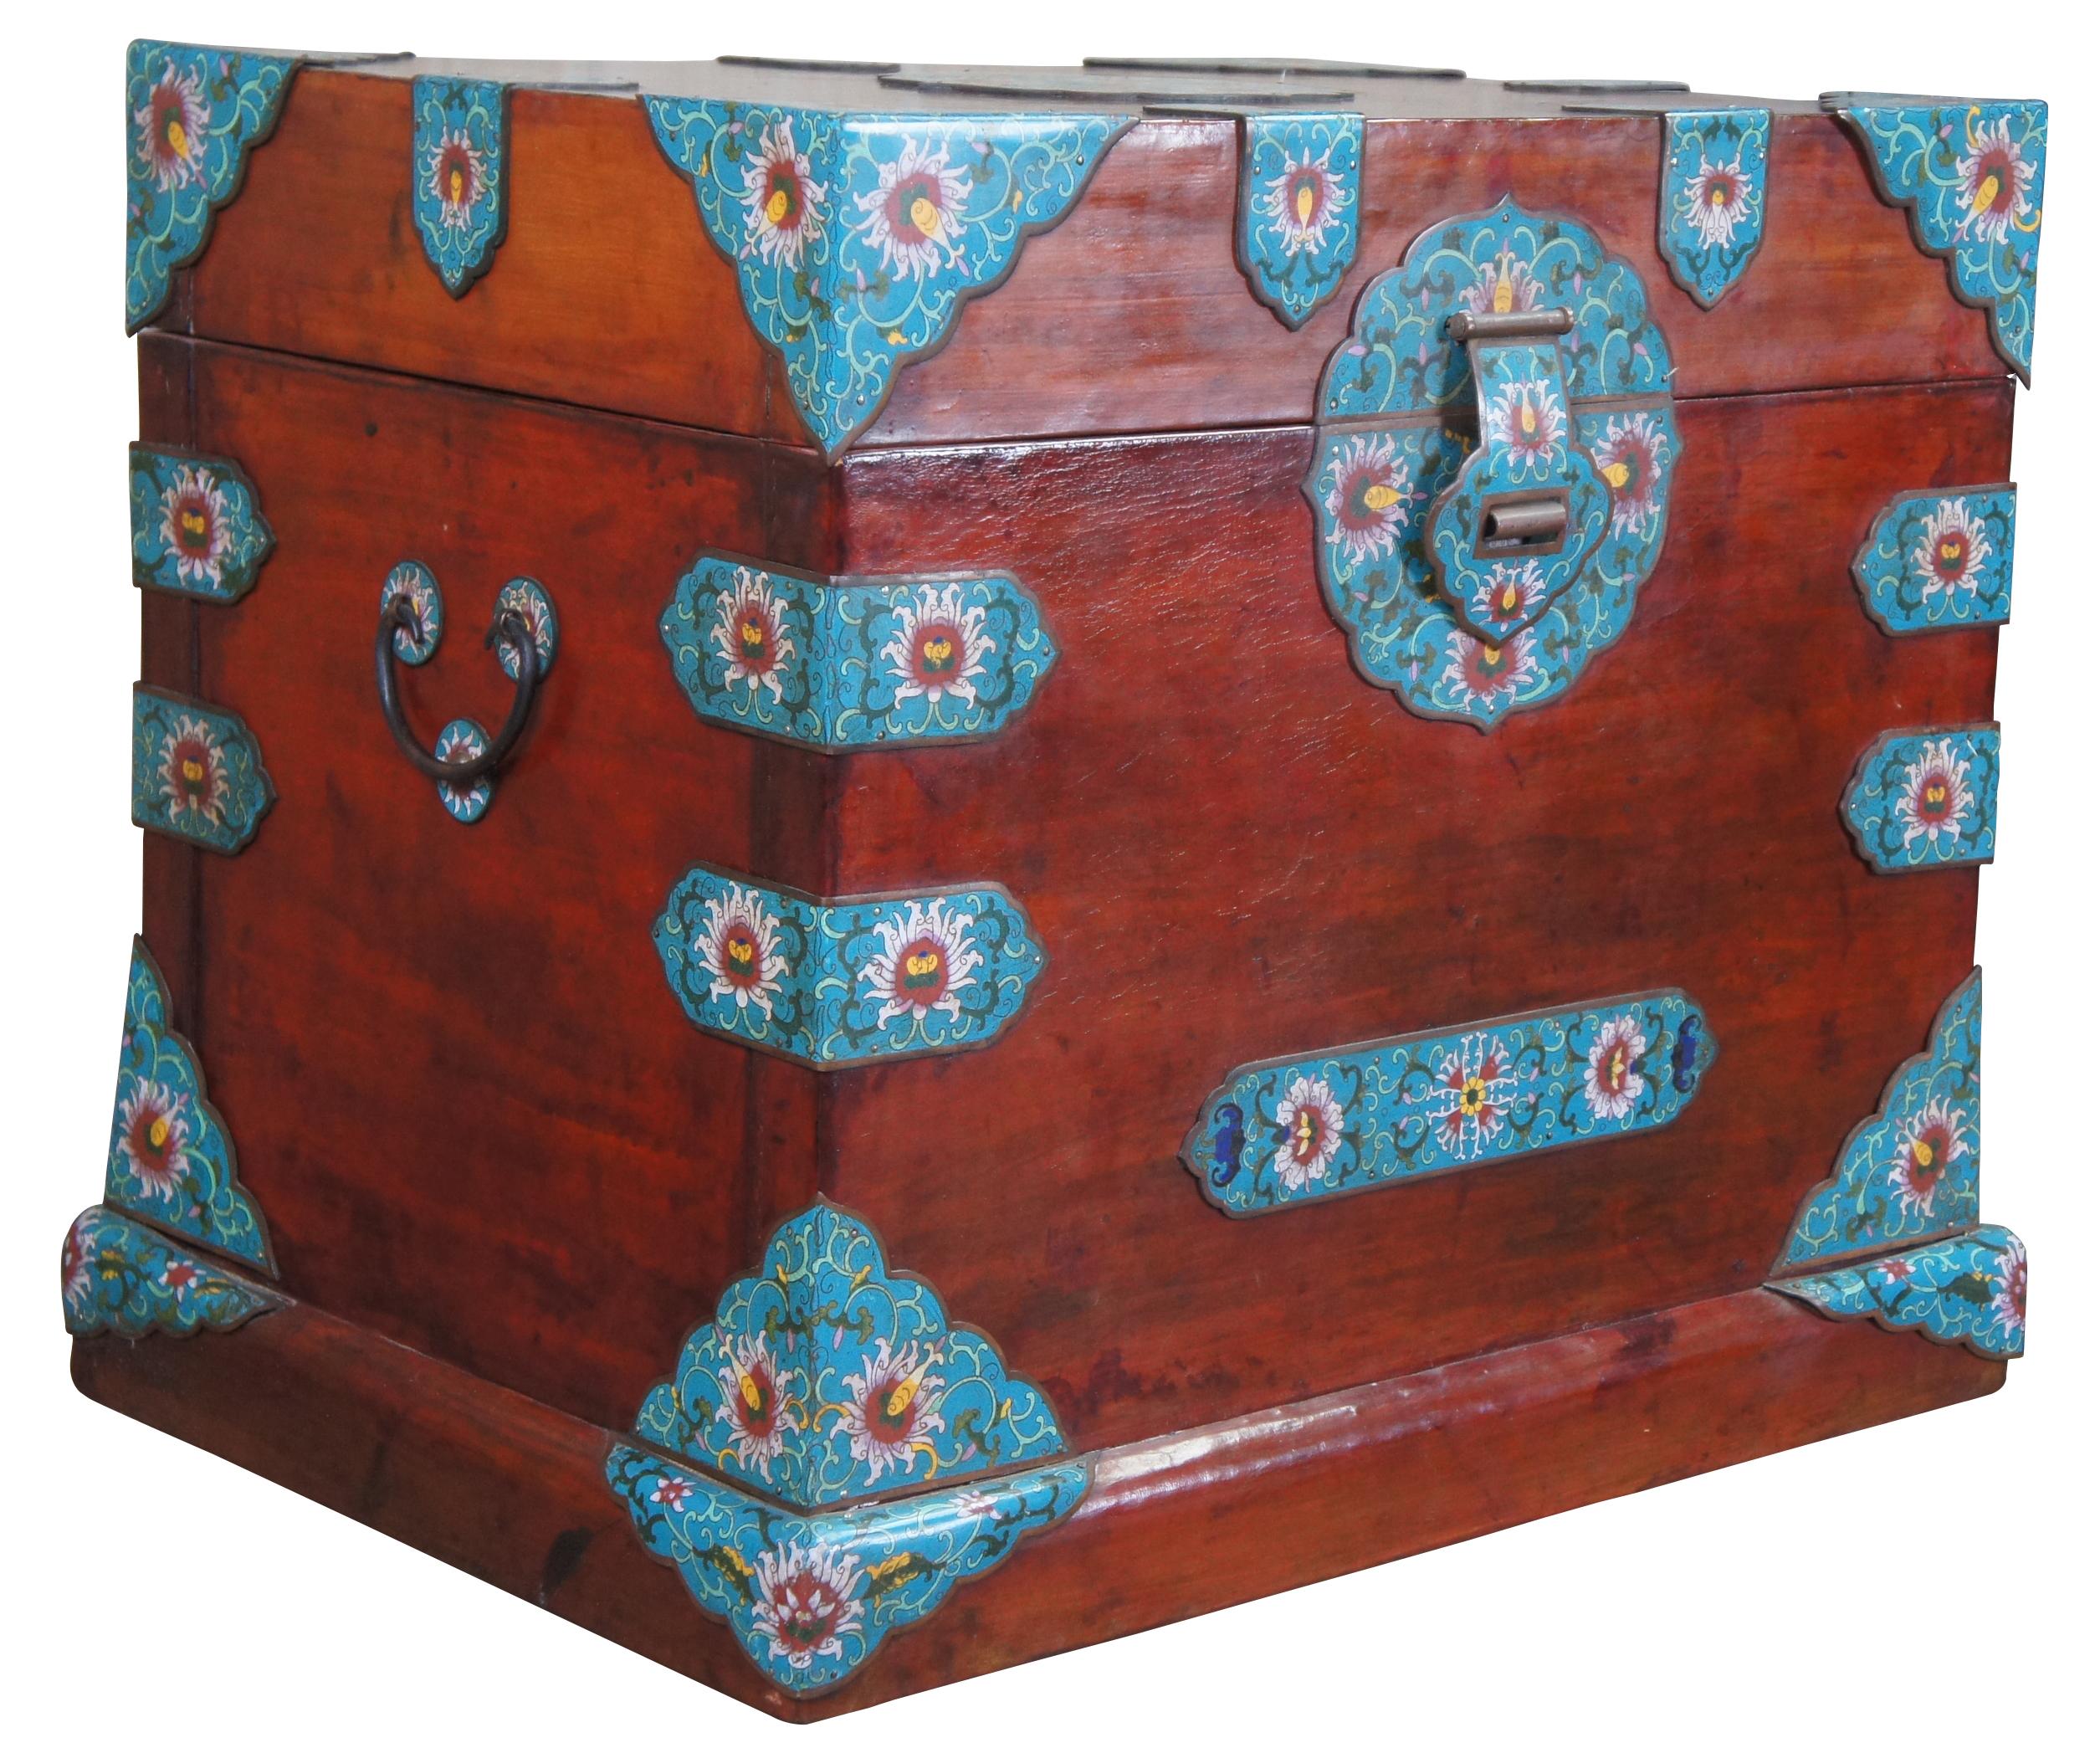 Chinese Export 20th Century Chinese Camphor Wood Cloisonne Bound Blanket Chest Trunk Pair